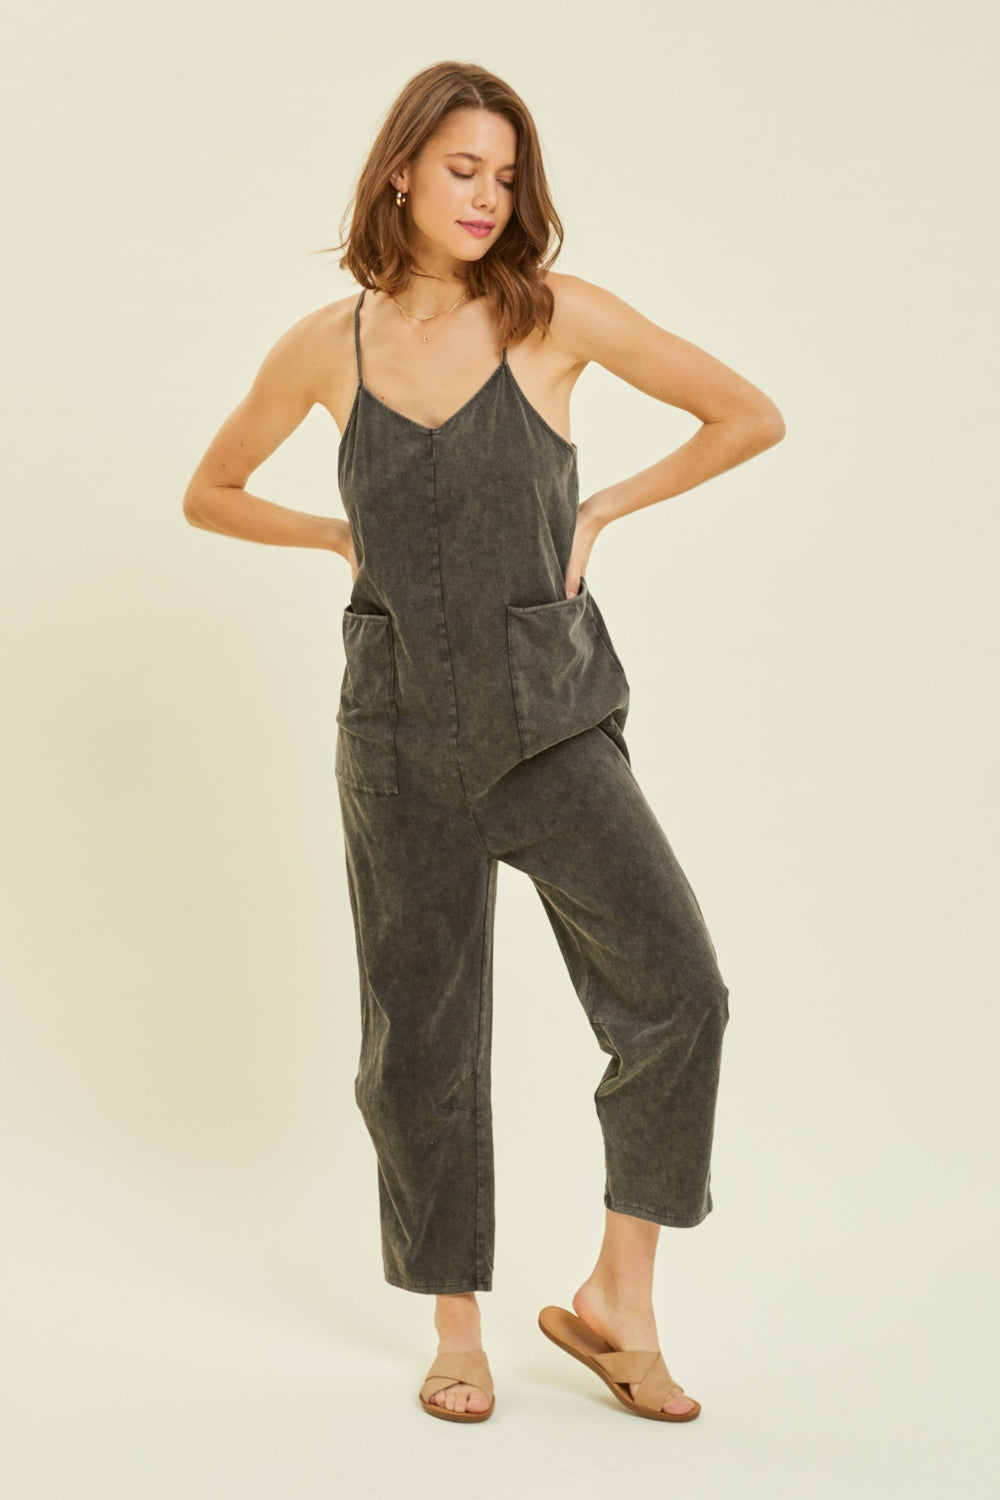 HEYSON Full Size Mineral-Washed Oversized Jumpsuit with Pockets Bottom wear